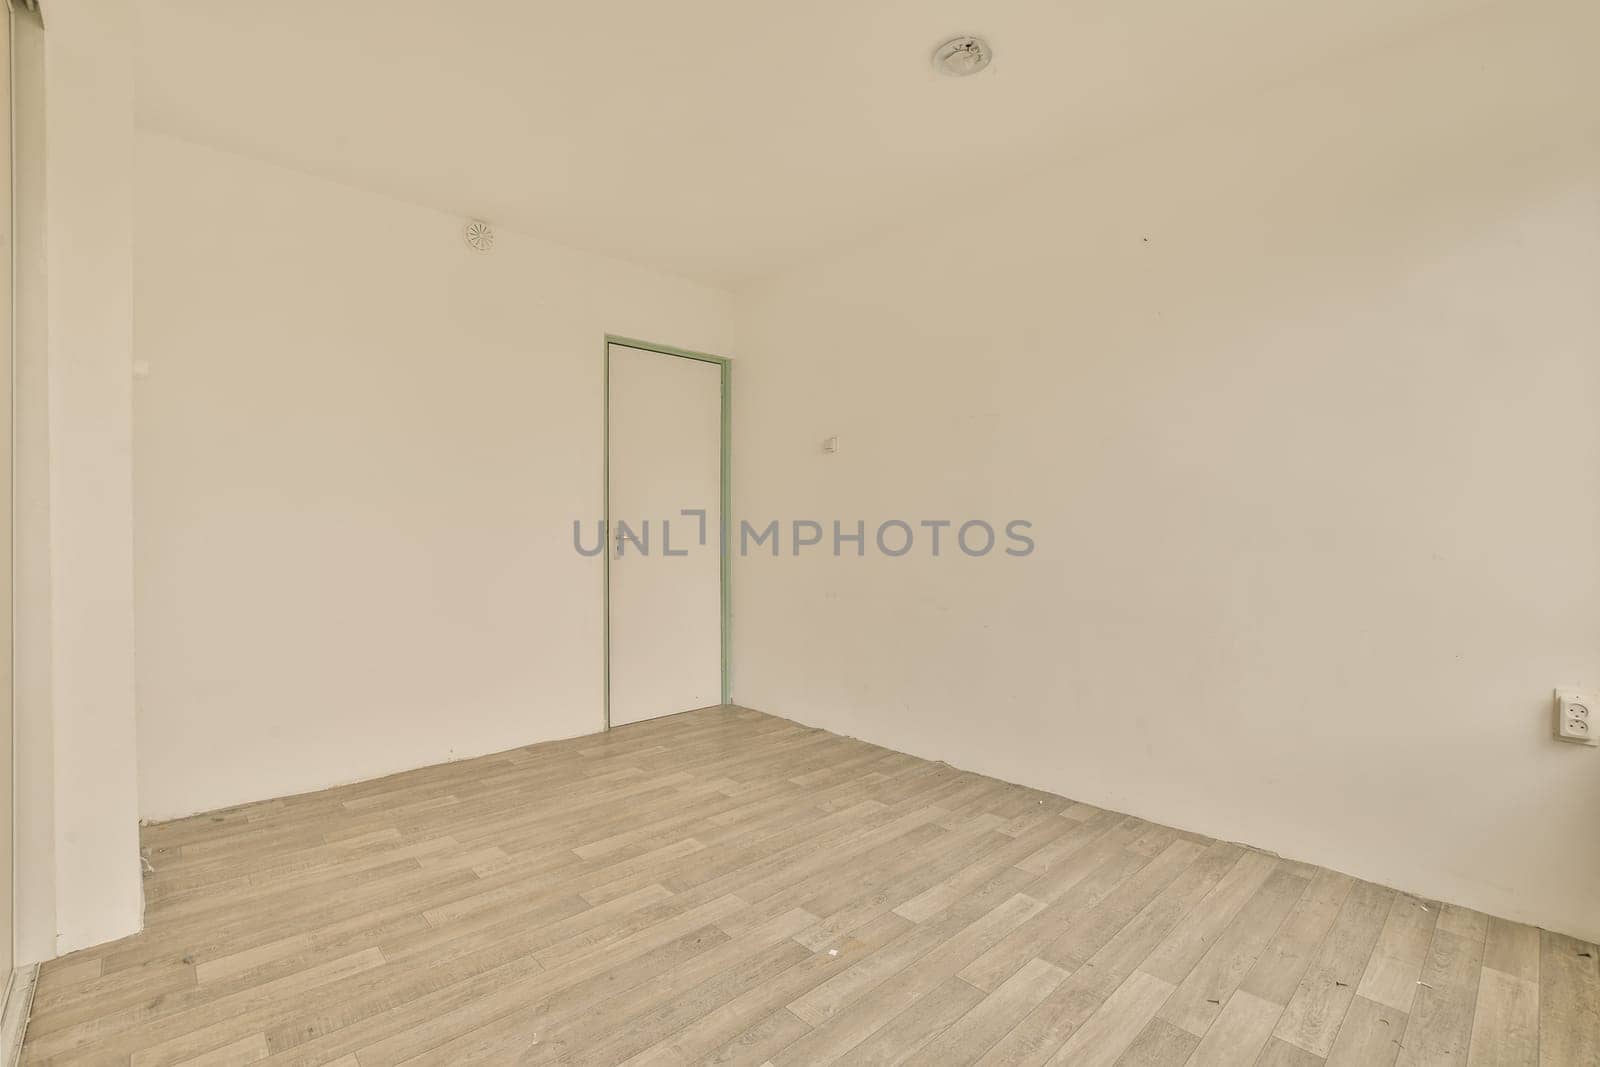 an empty room with white walls and wood flooring on the right, there is a green door in the corner